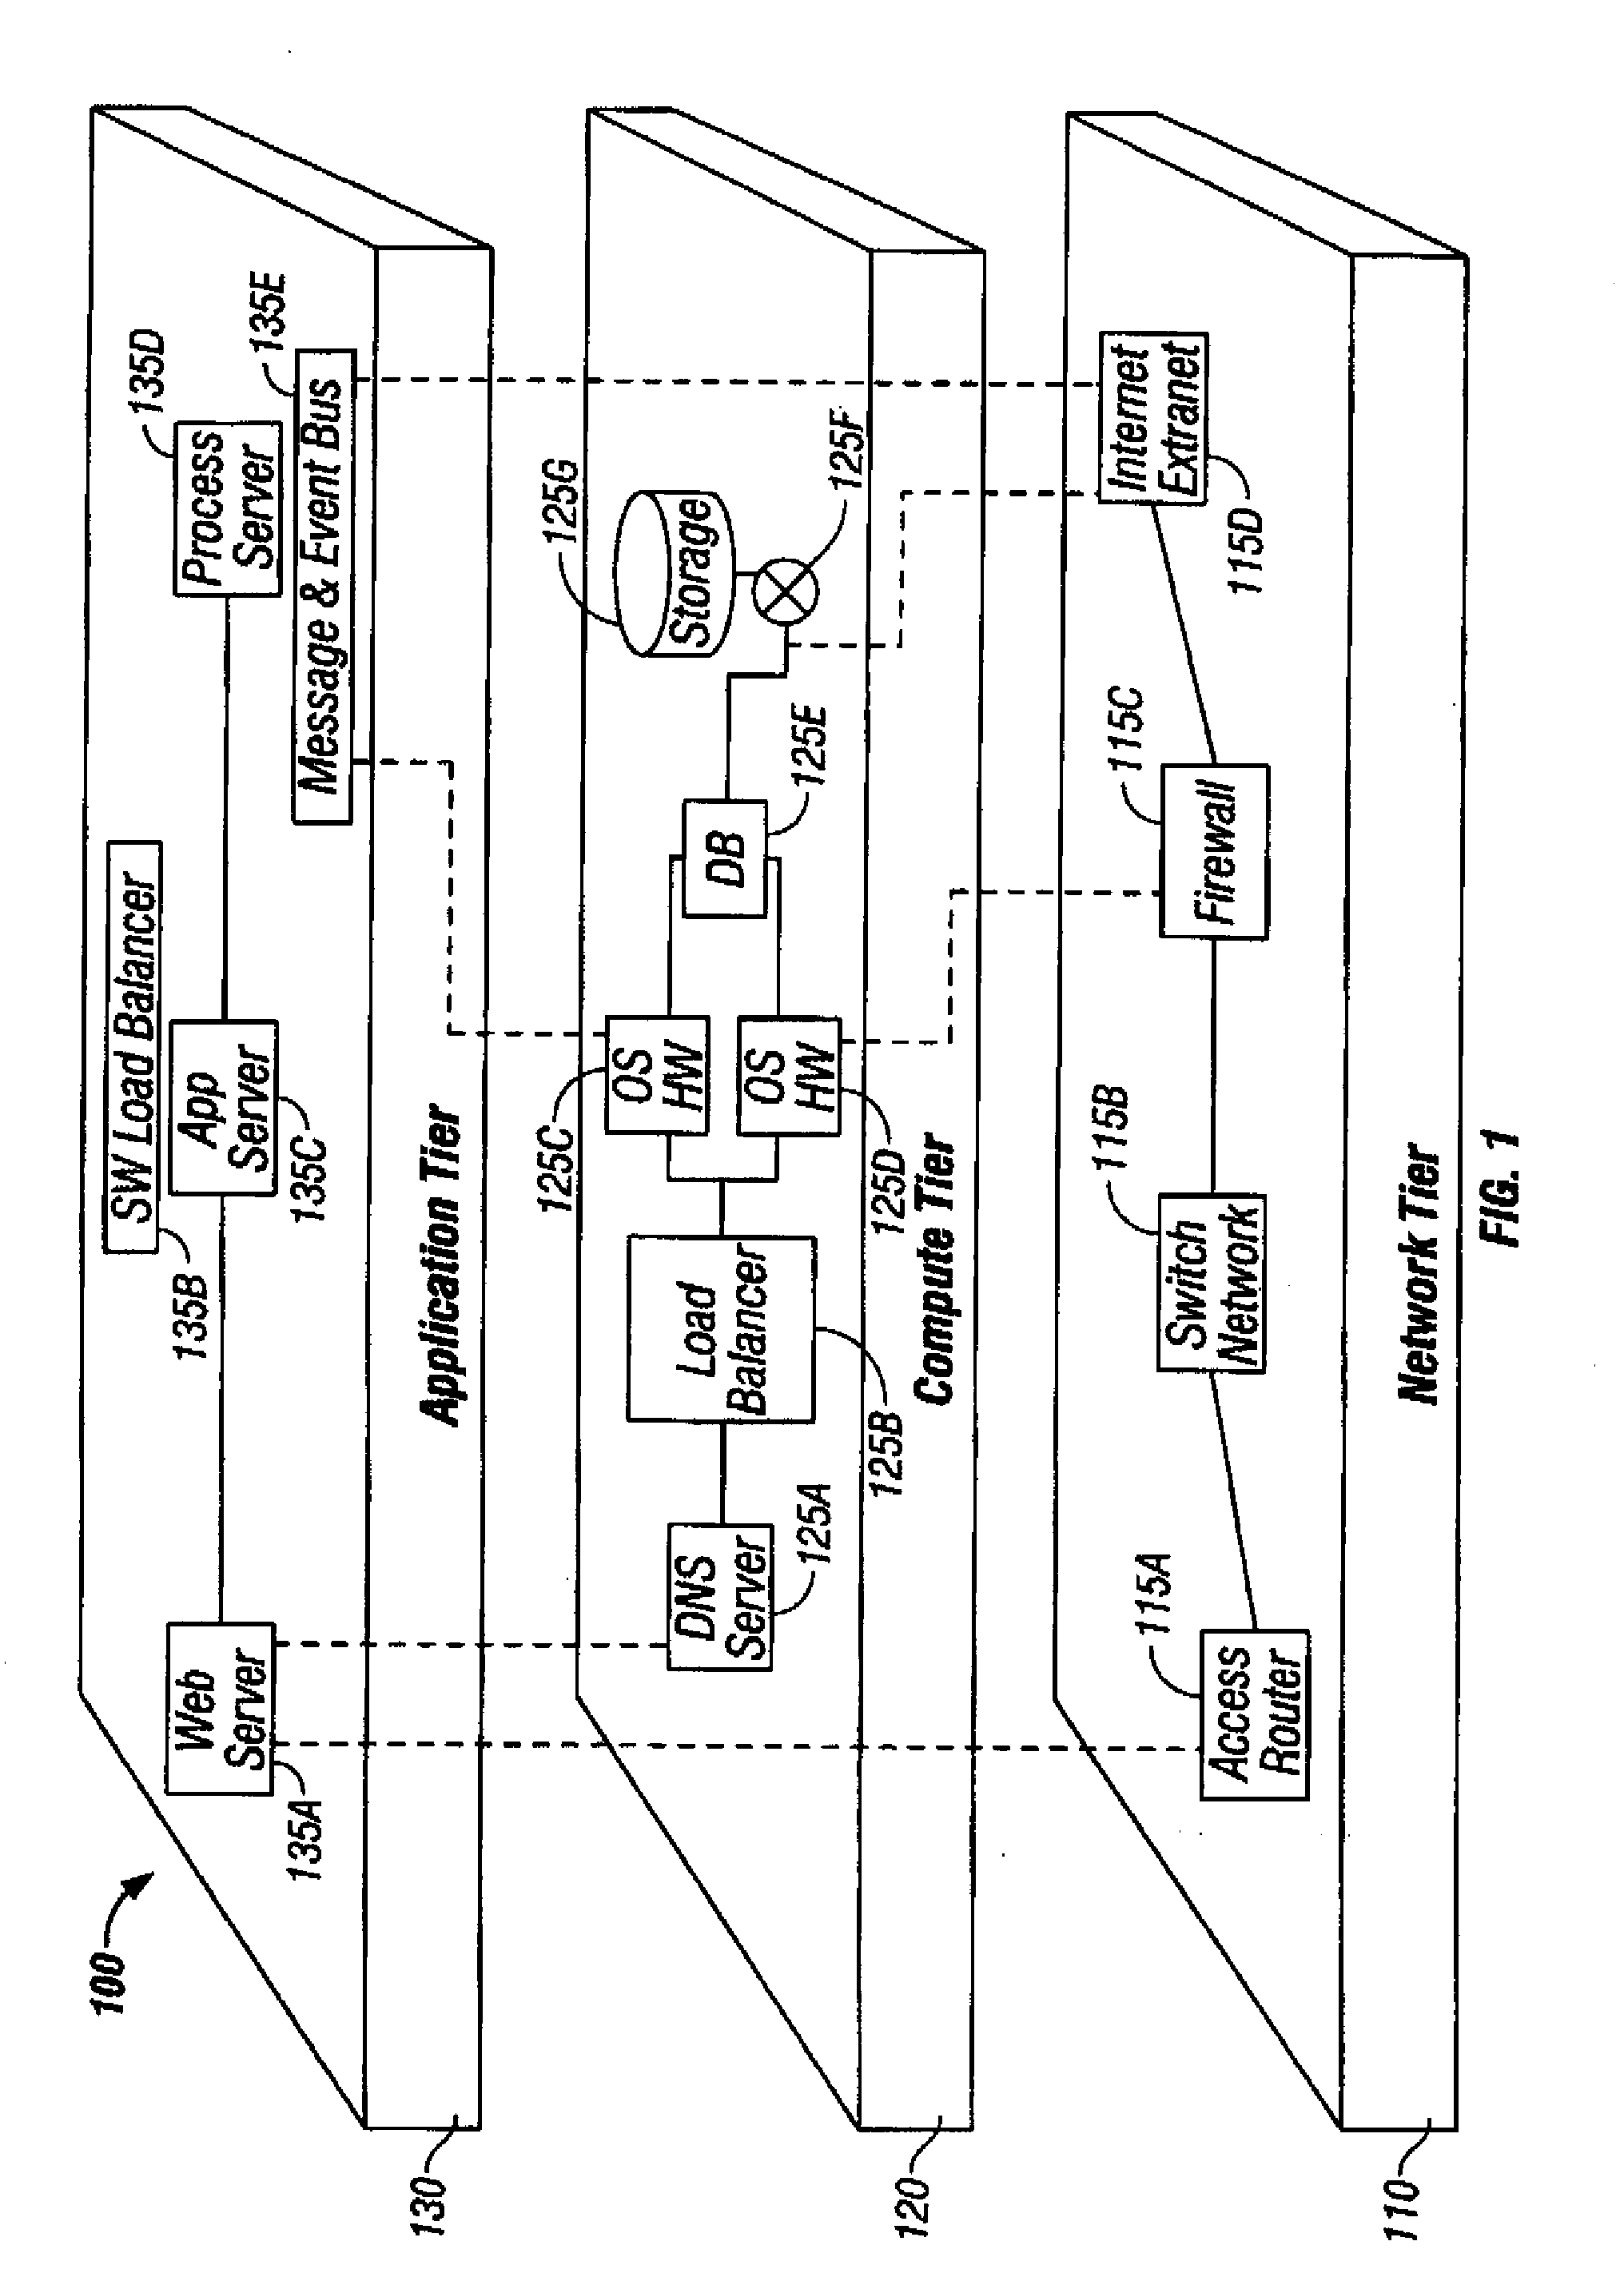 Topology mapping of a mulitier compute infrastructure